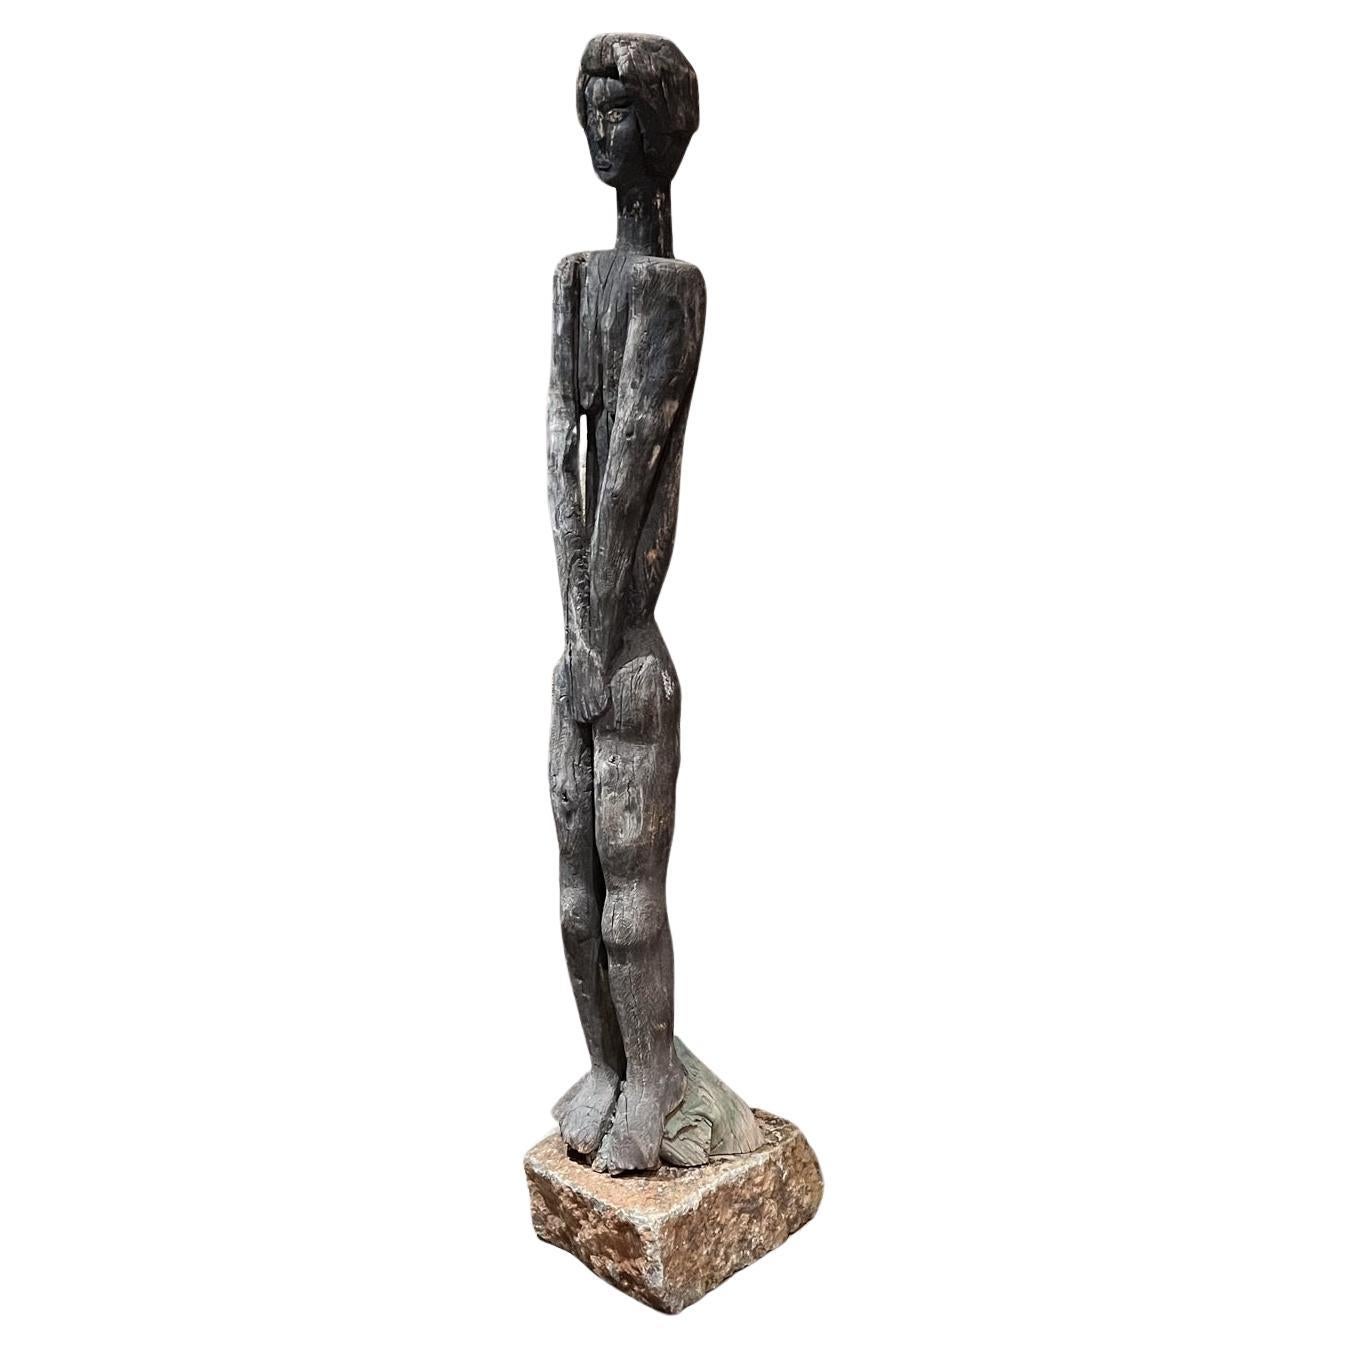 What techniques did Giacometti use?